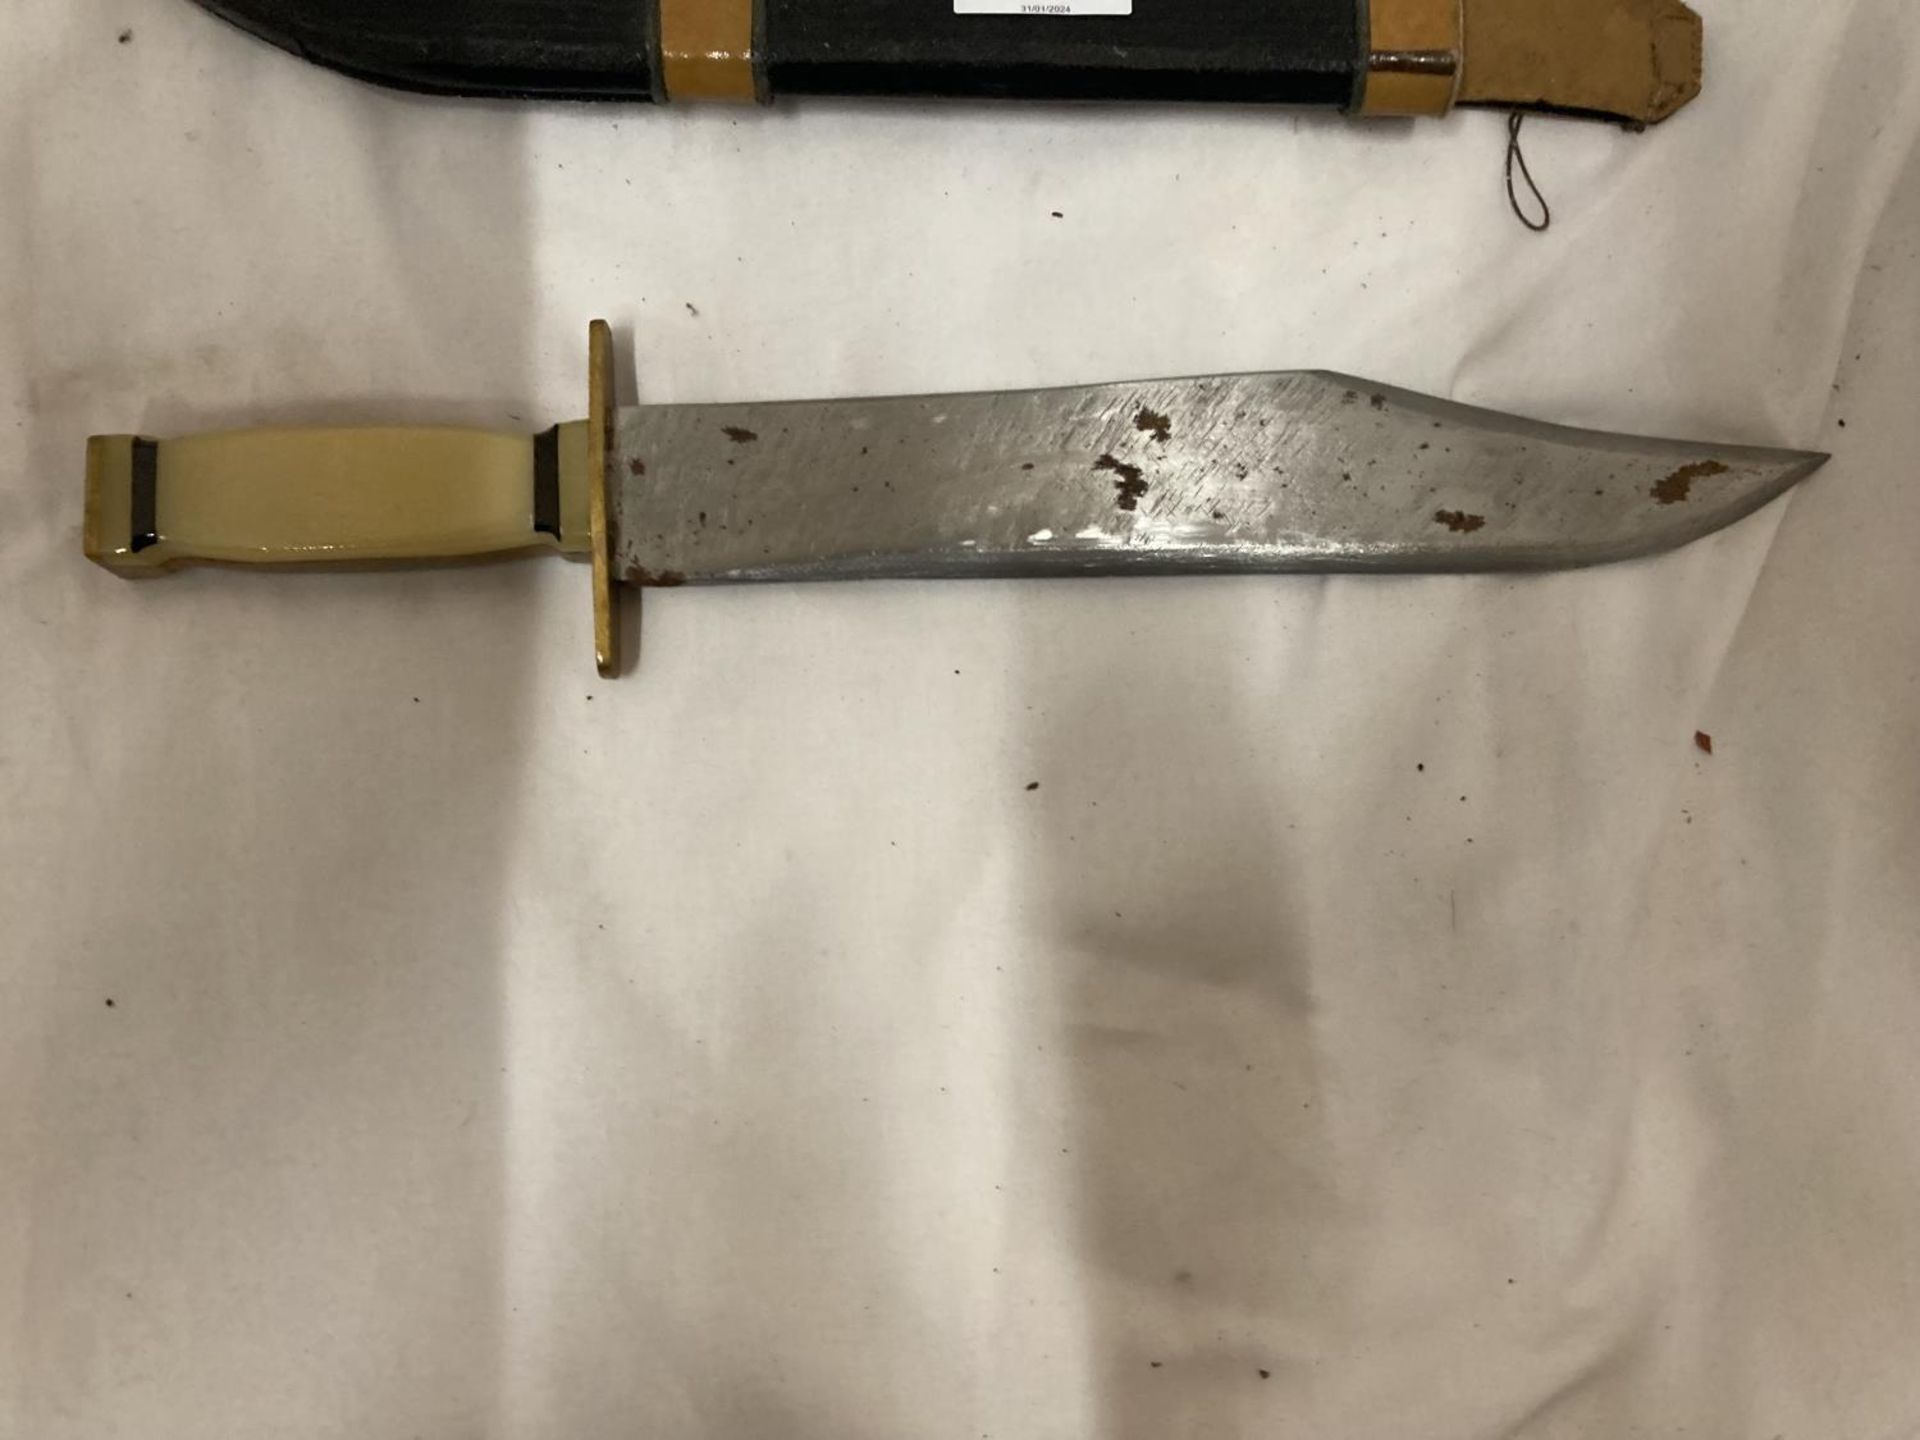 A BOWIE KNIFE AND SCABBARD WITH 28 CM BLADE - Image 2 of 4